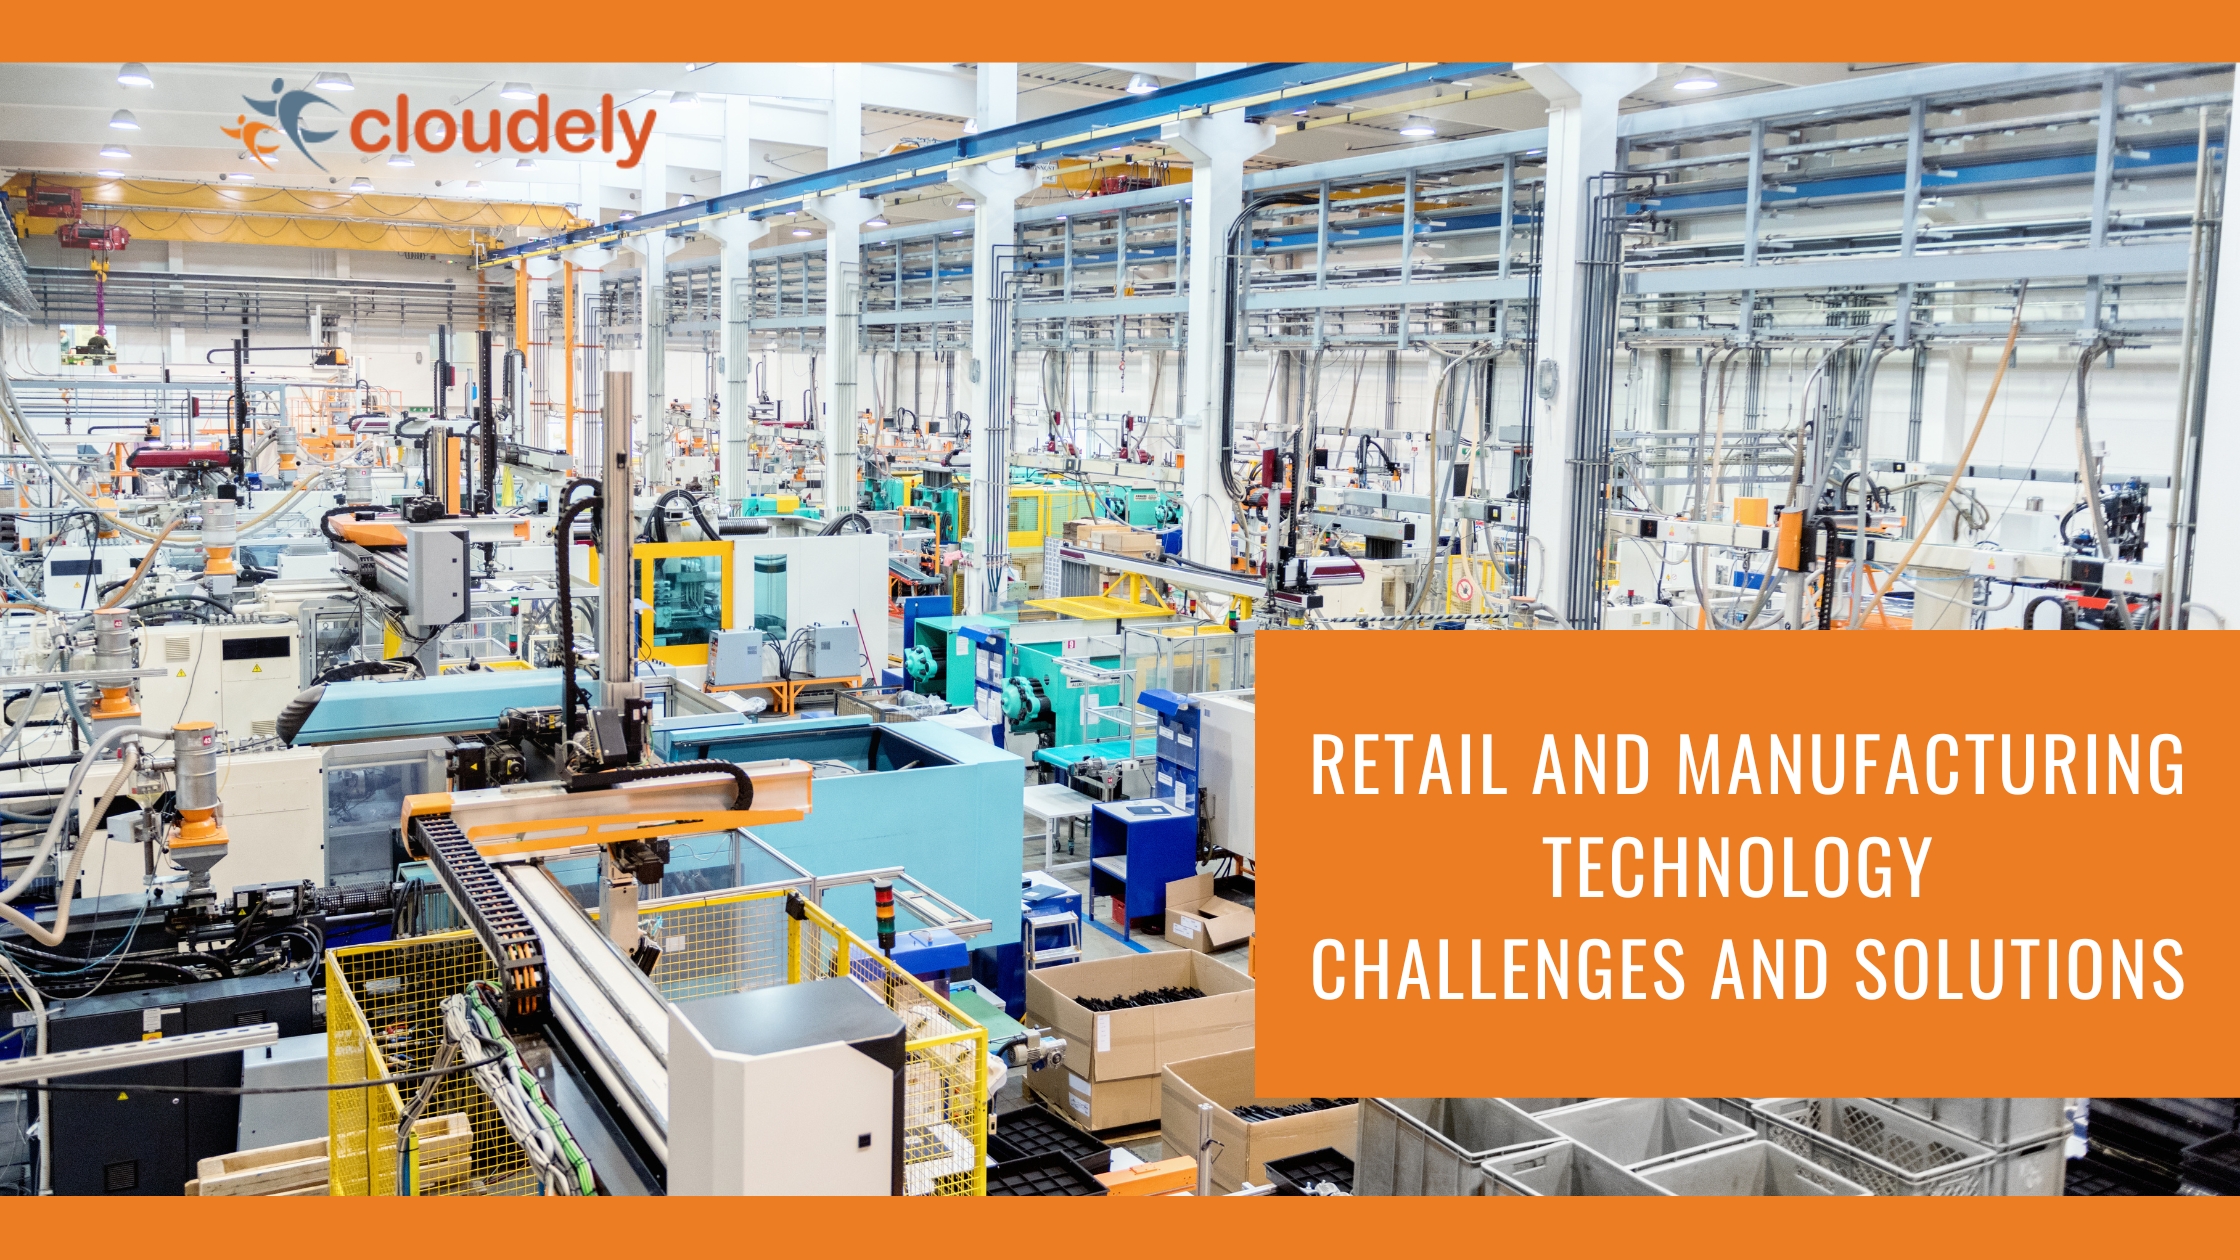 Retail and manufacturing technology challenges and solutions